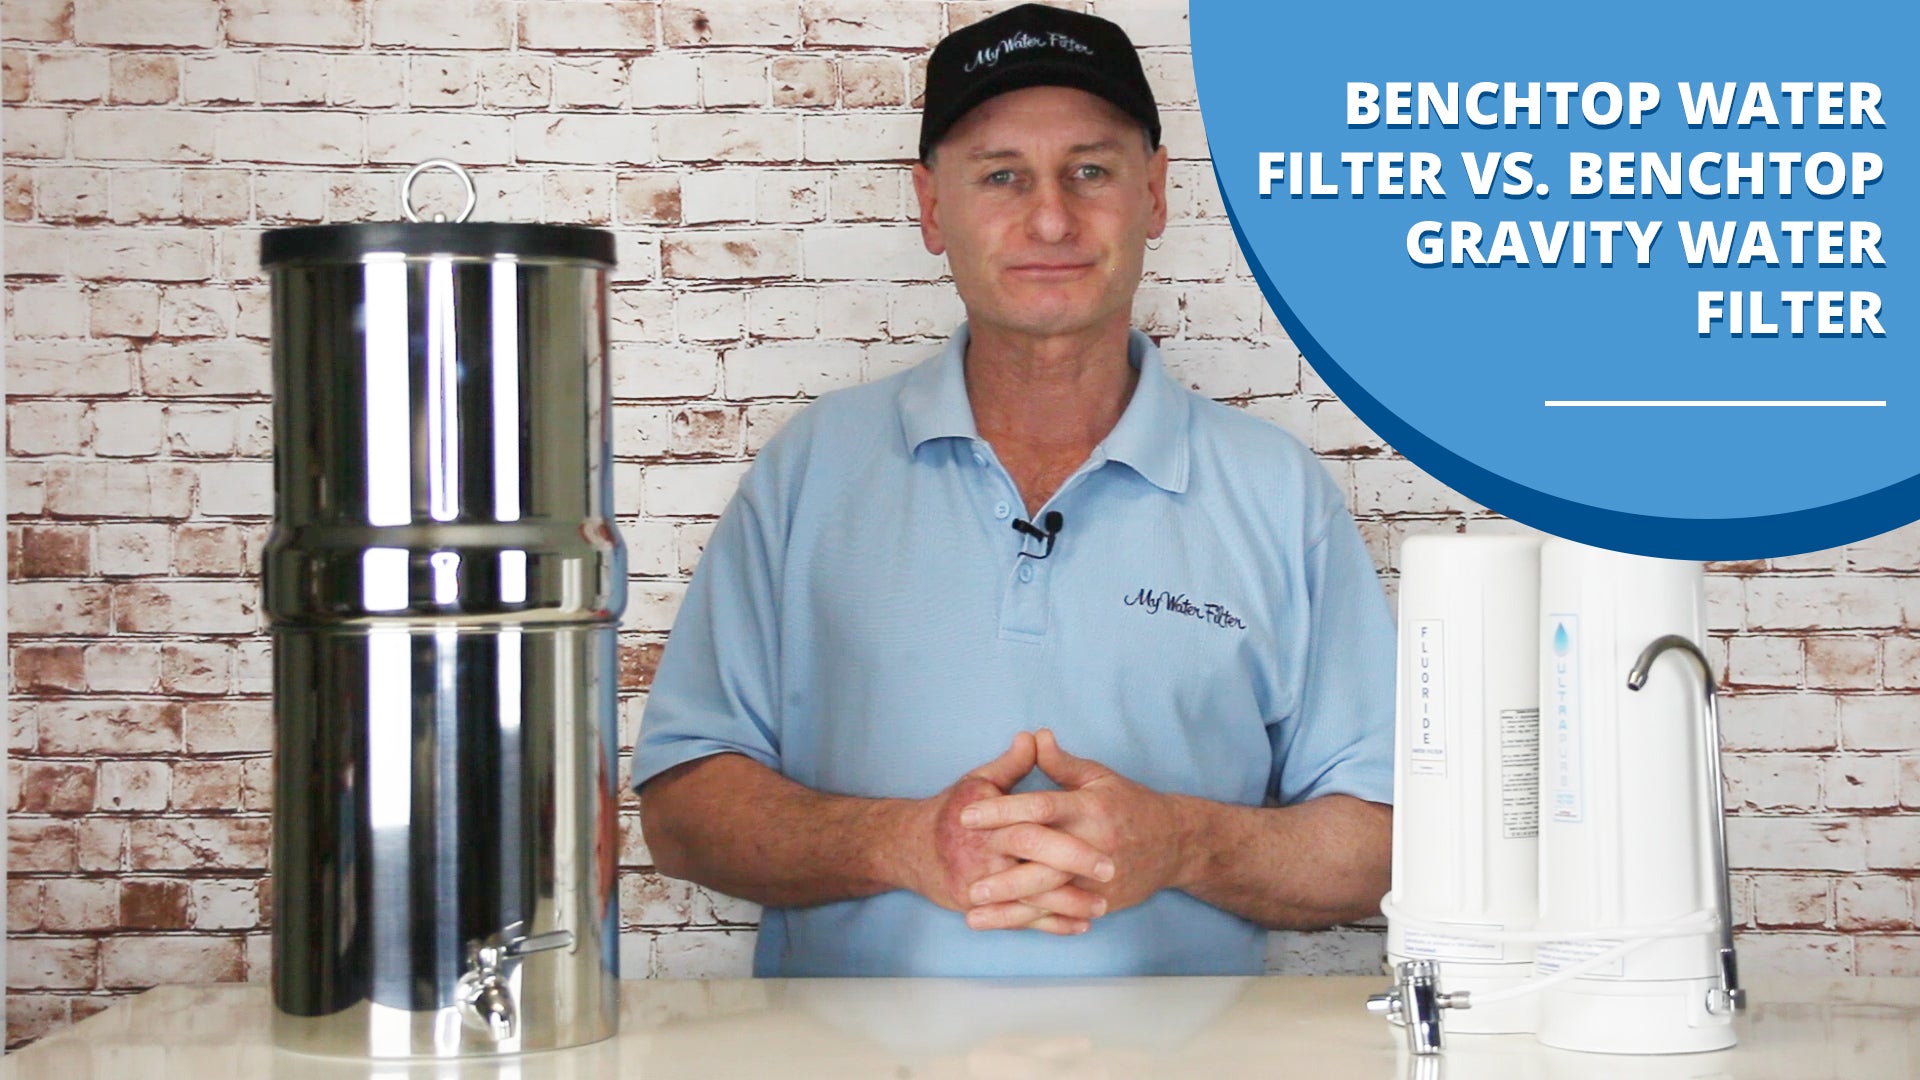 Water Filter Comparison - Benchtop Water Filter Vs. Benchtop Gravity Water Filter